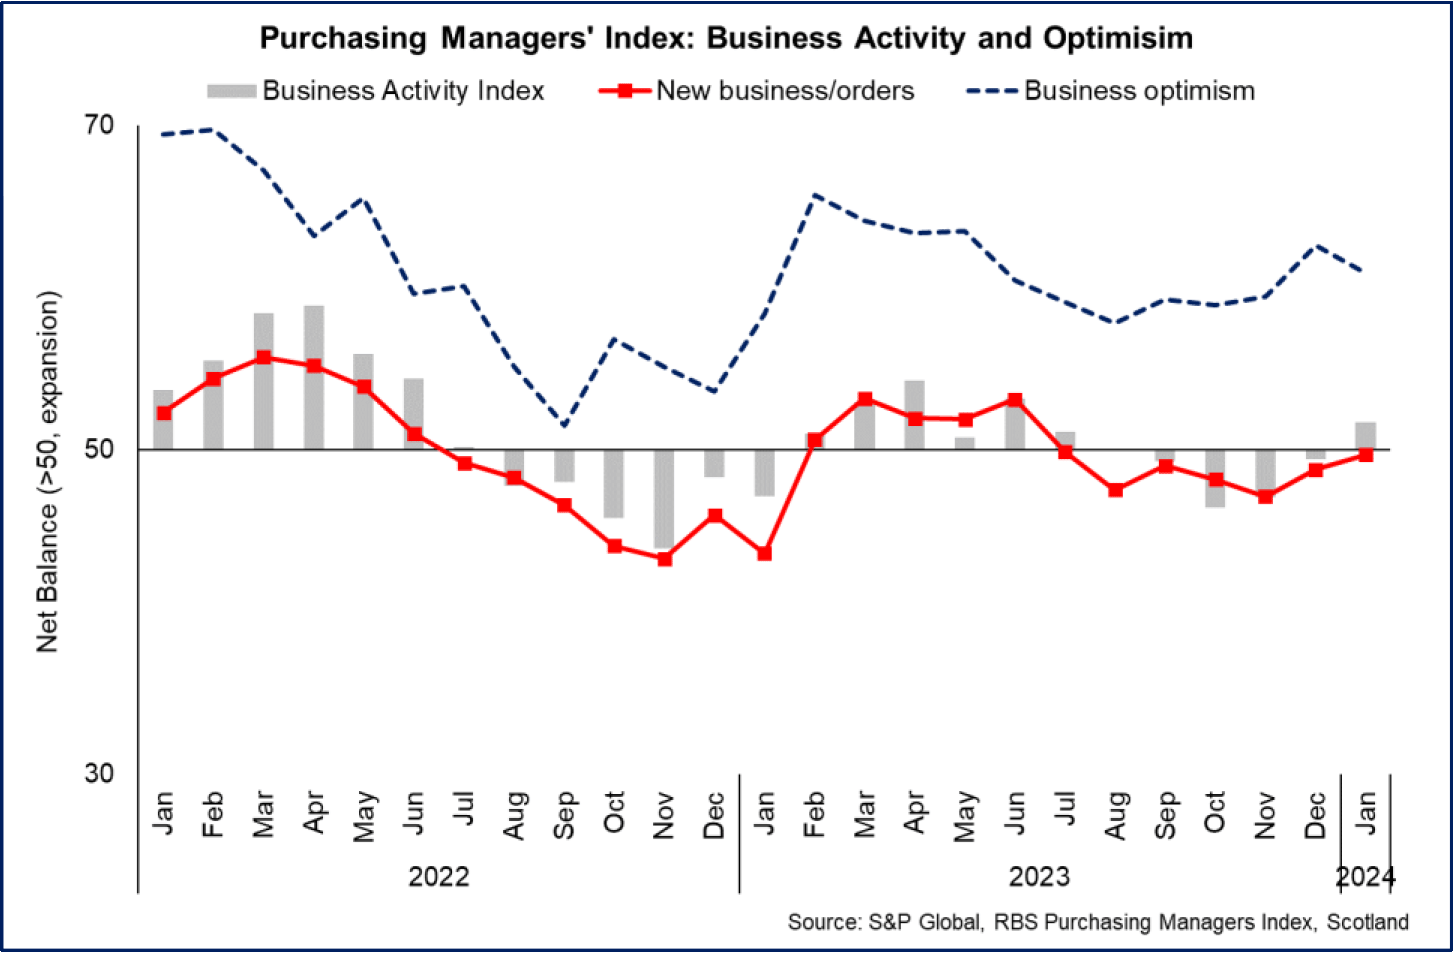 business activity indicators strengthened in January 2024 while business optimism decreased but remained positive